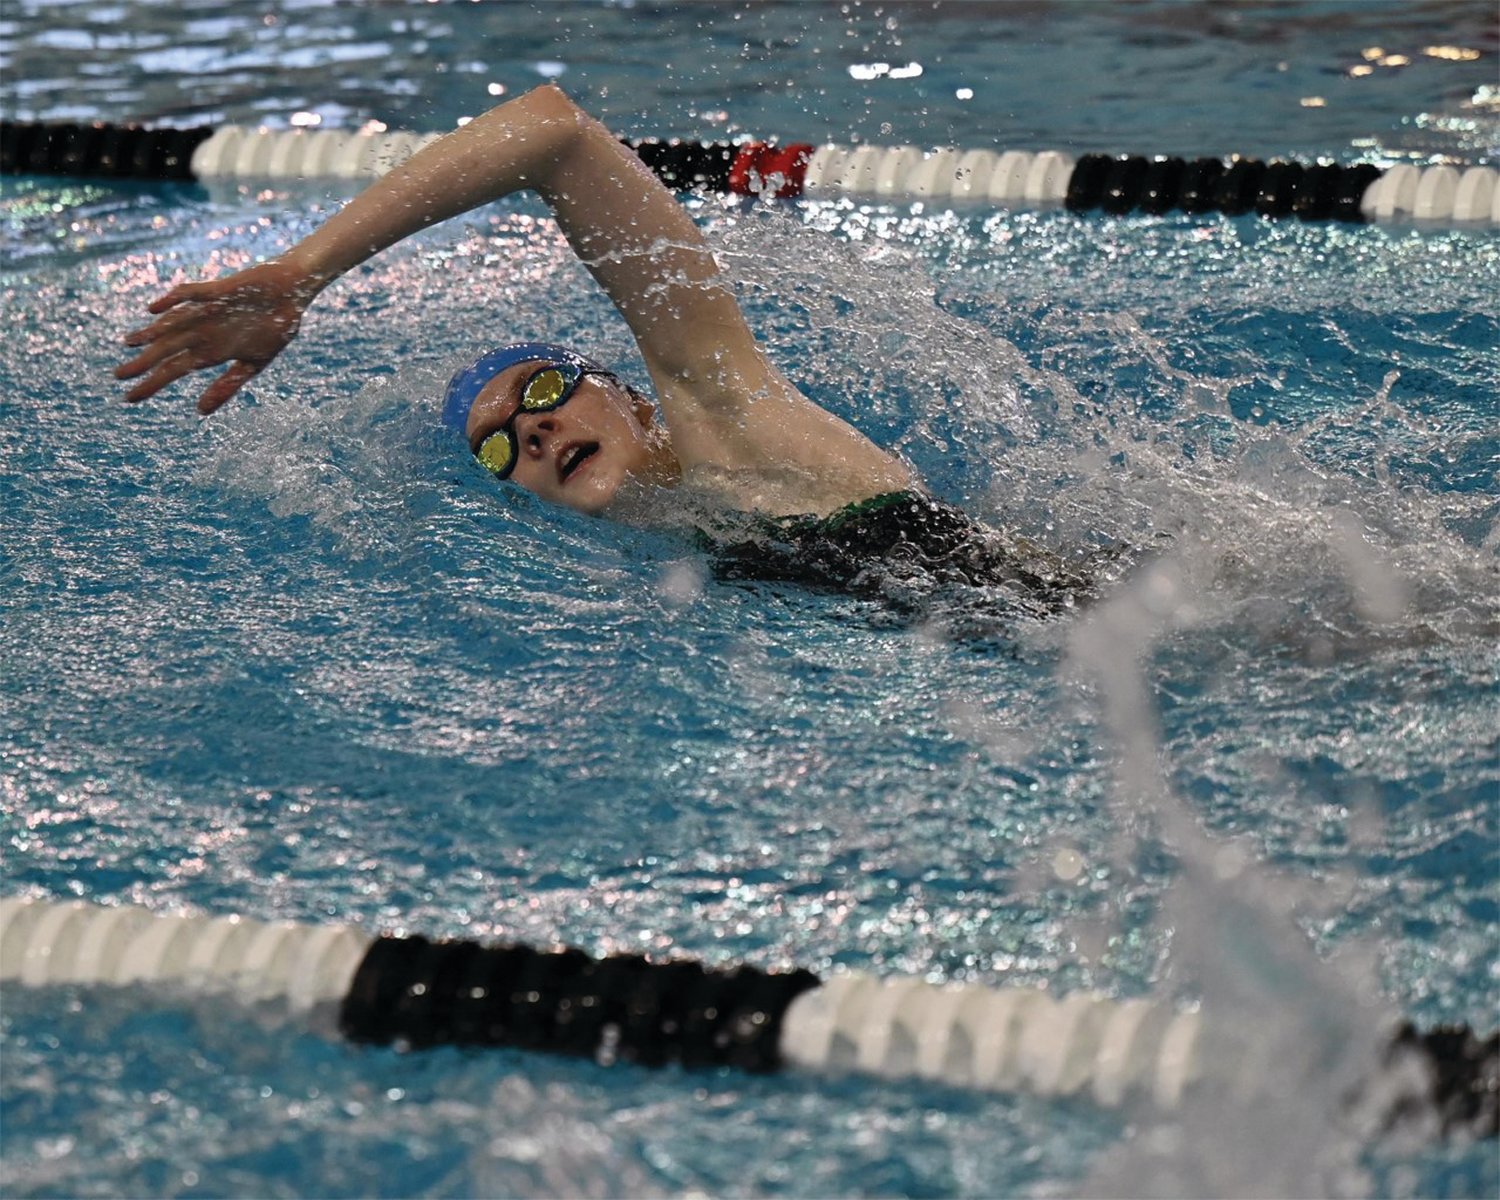 BIG RACE: Cranston East swimmer Ruby Houle competes in a relay race last week at the Rhode Island Interscholastic League Swimming State Championships. Houle had a strong outing and was a member of the team’s relay group that took 11th in the 400 free relay race. (Photos by Leo van Dijk/rhodyphoto.zenfolio.com)